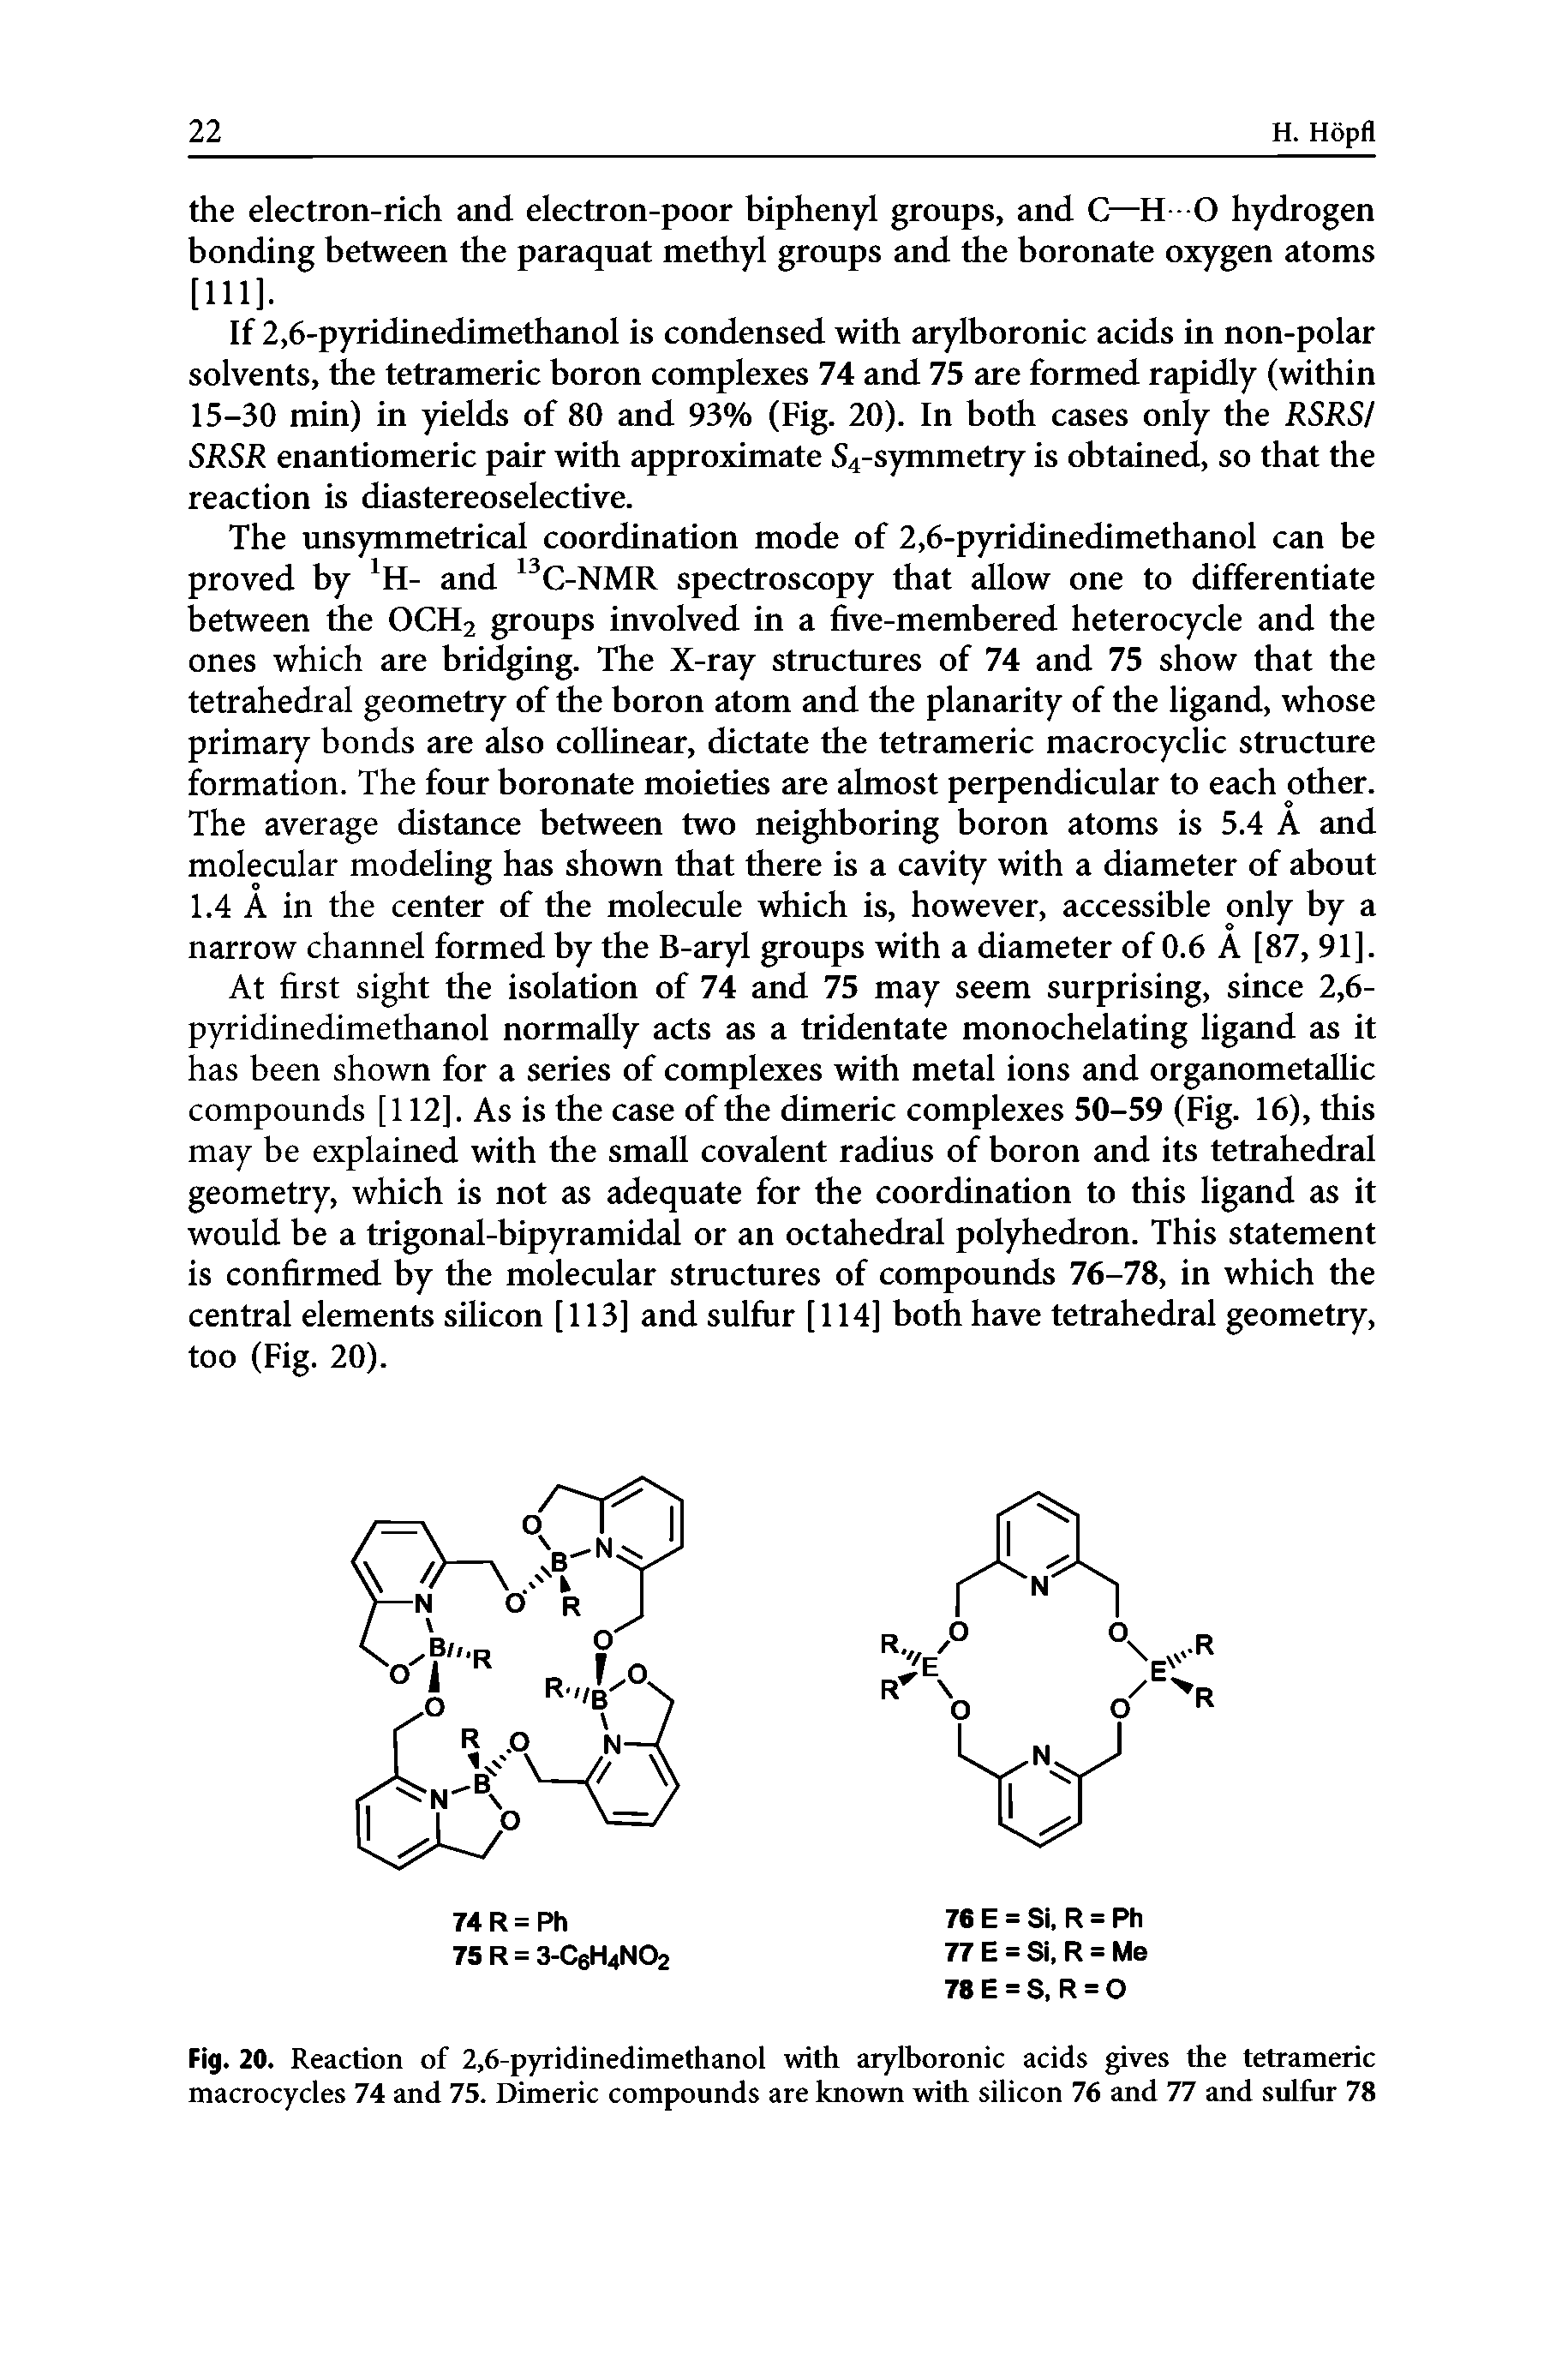 Fig. 20. Reaction of 2,6-pyridinedimethanol with arylboronic acids gives the tetrameric macrocycles 74 and 75. Dimeric compounds are known with silicon 76 and 77 and sulfur 78...